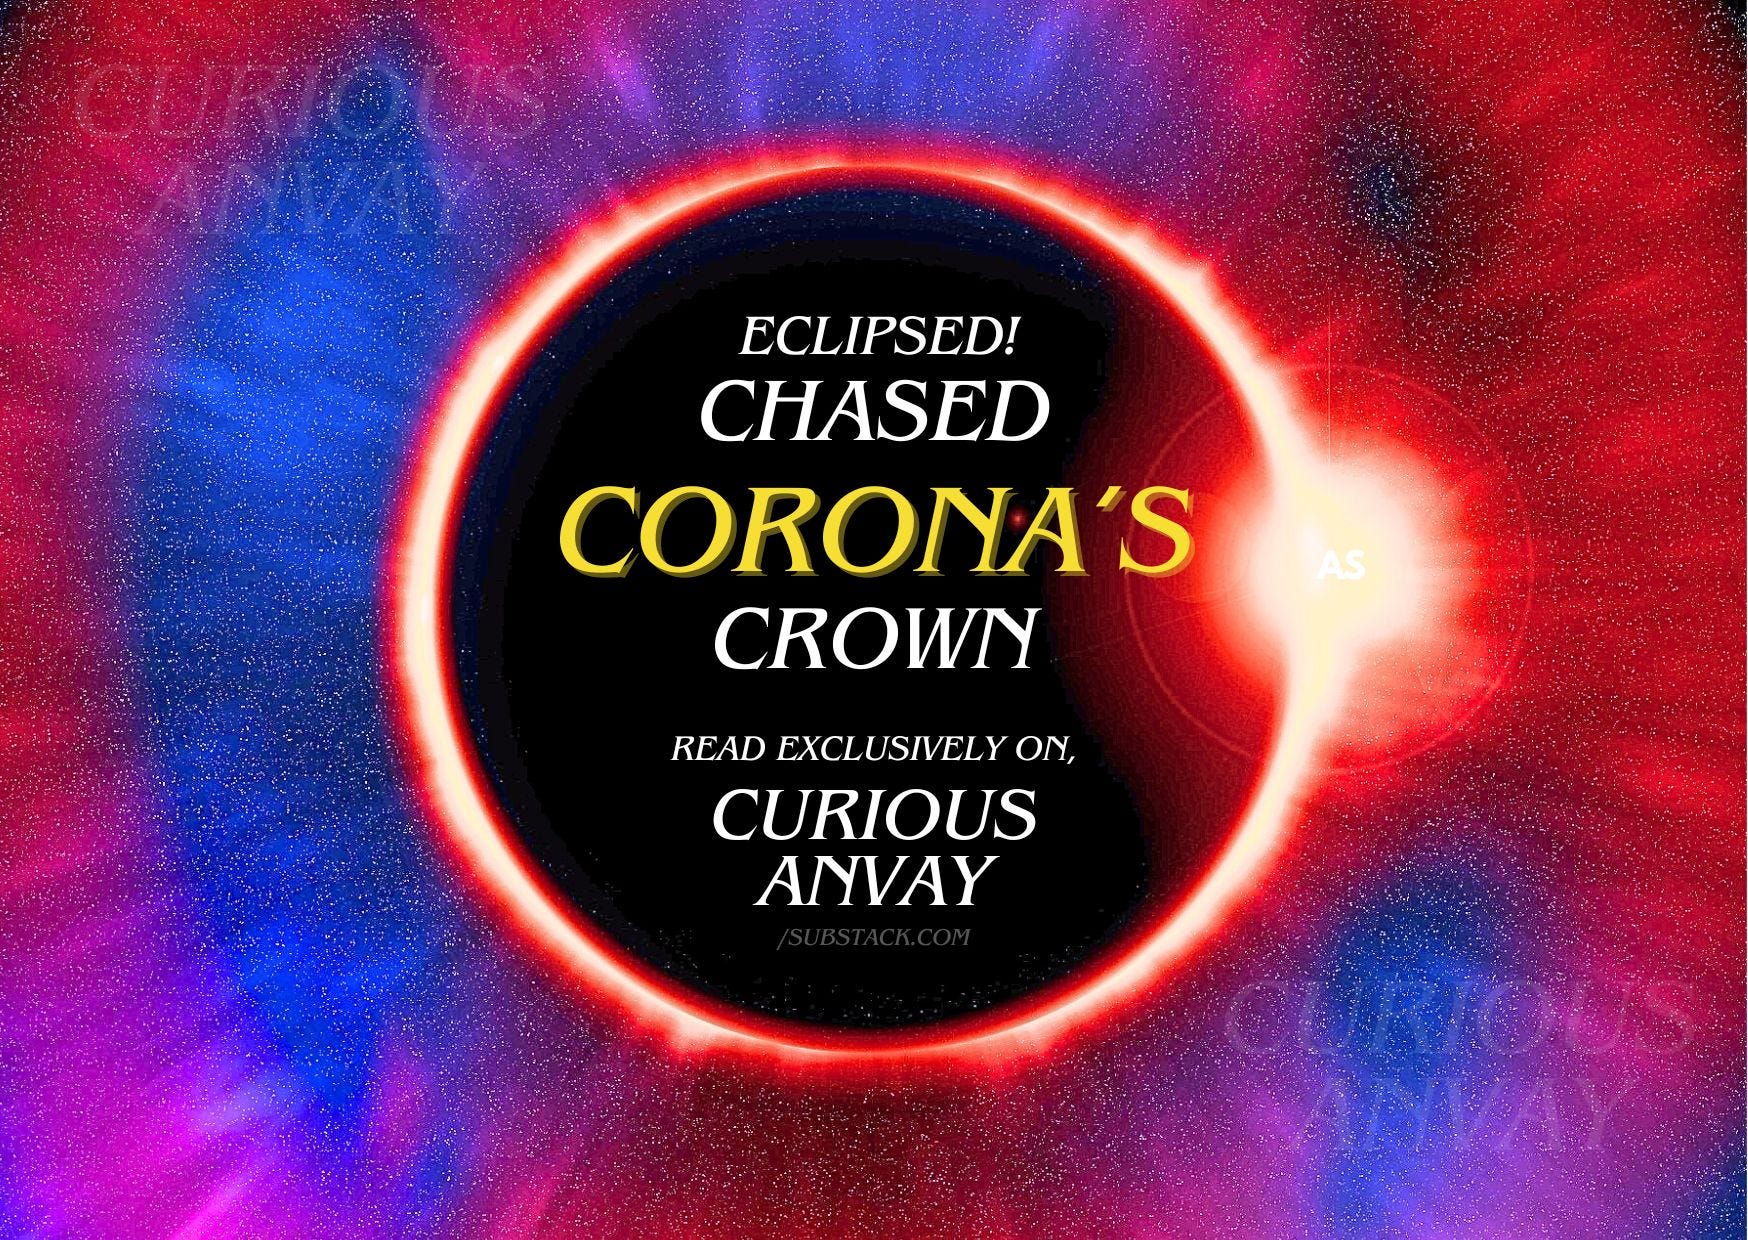 Chased Corona’s Crown Earth gets Eclipsed